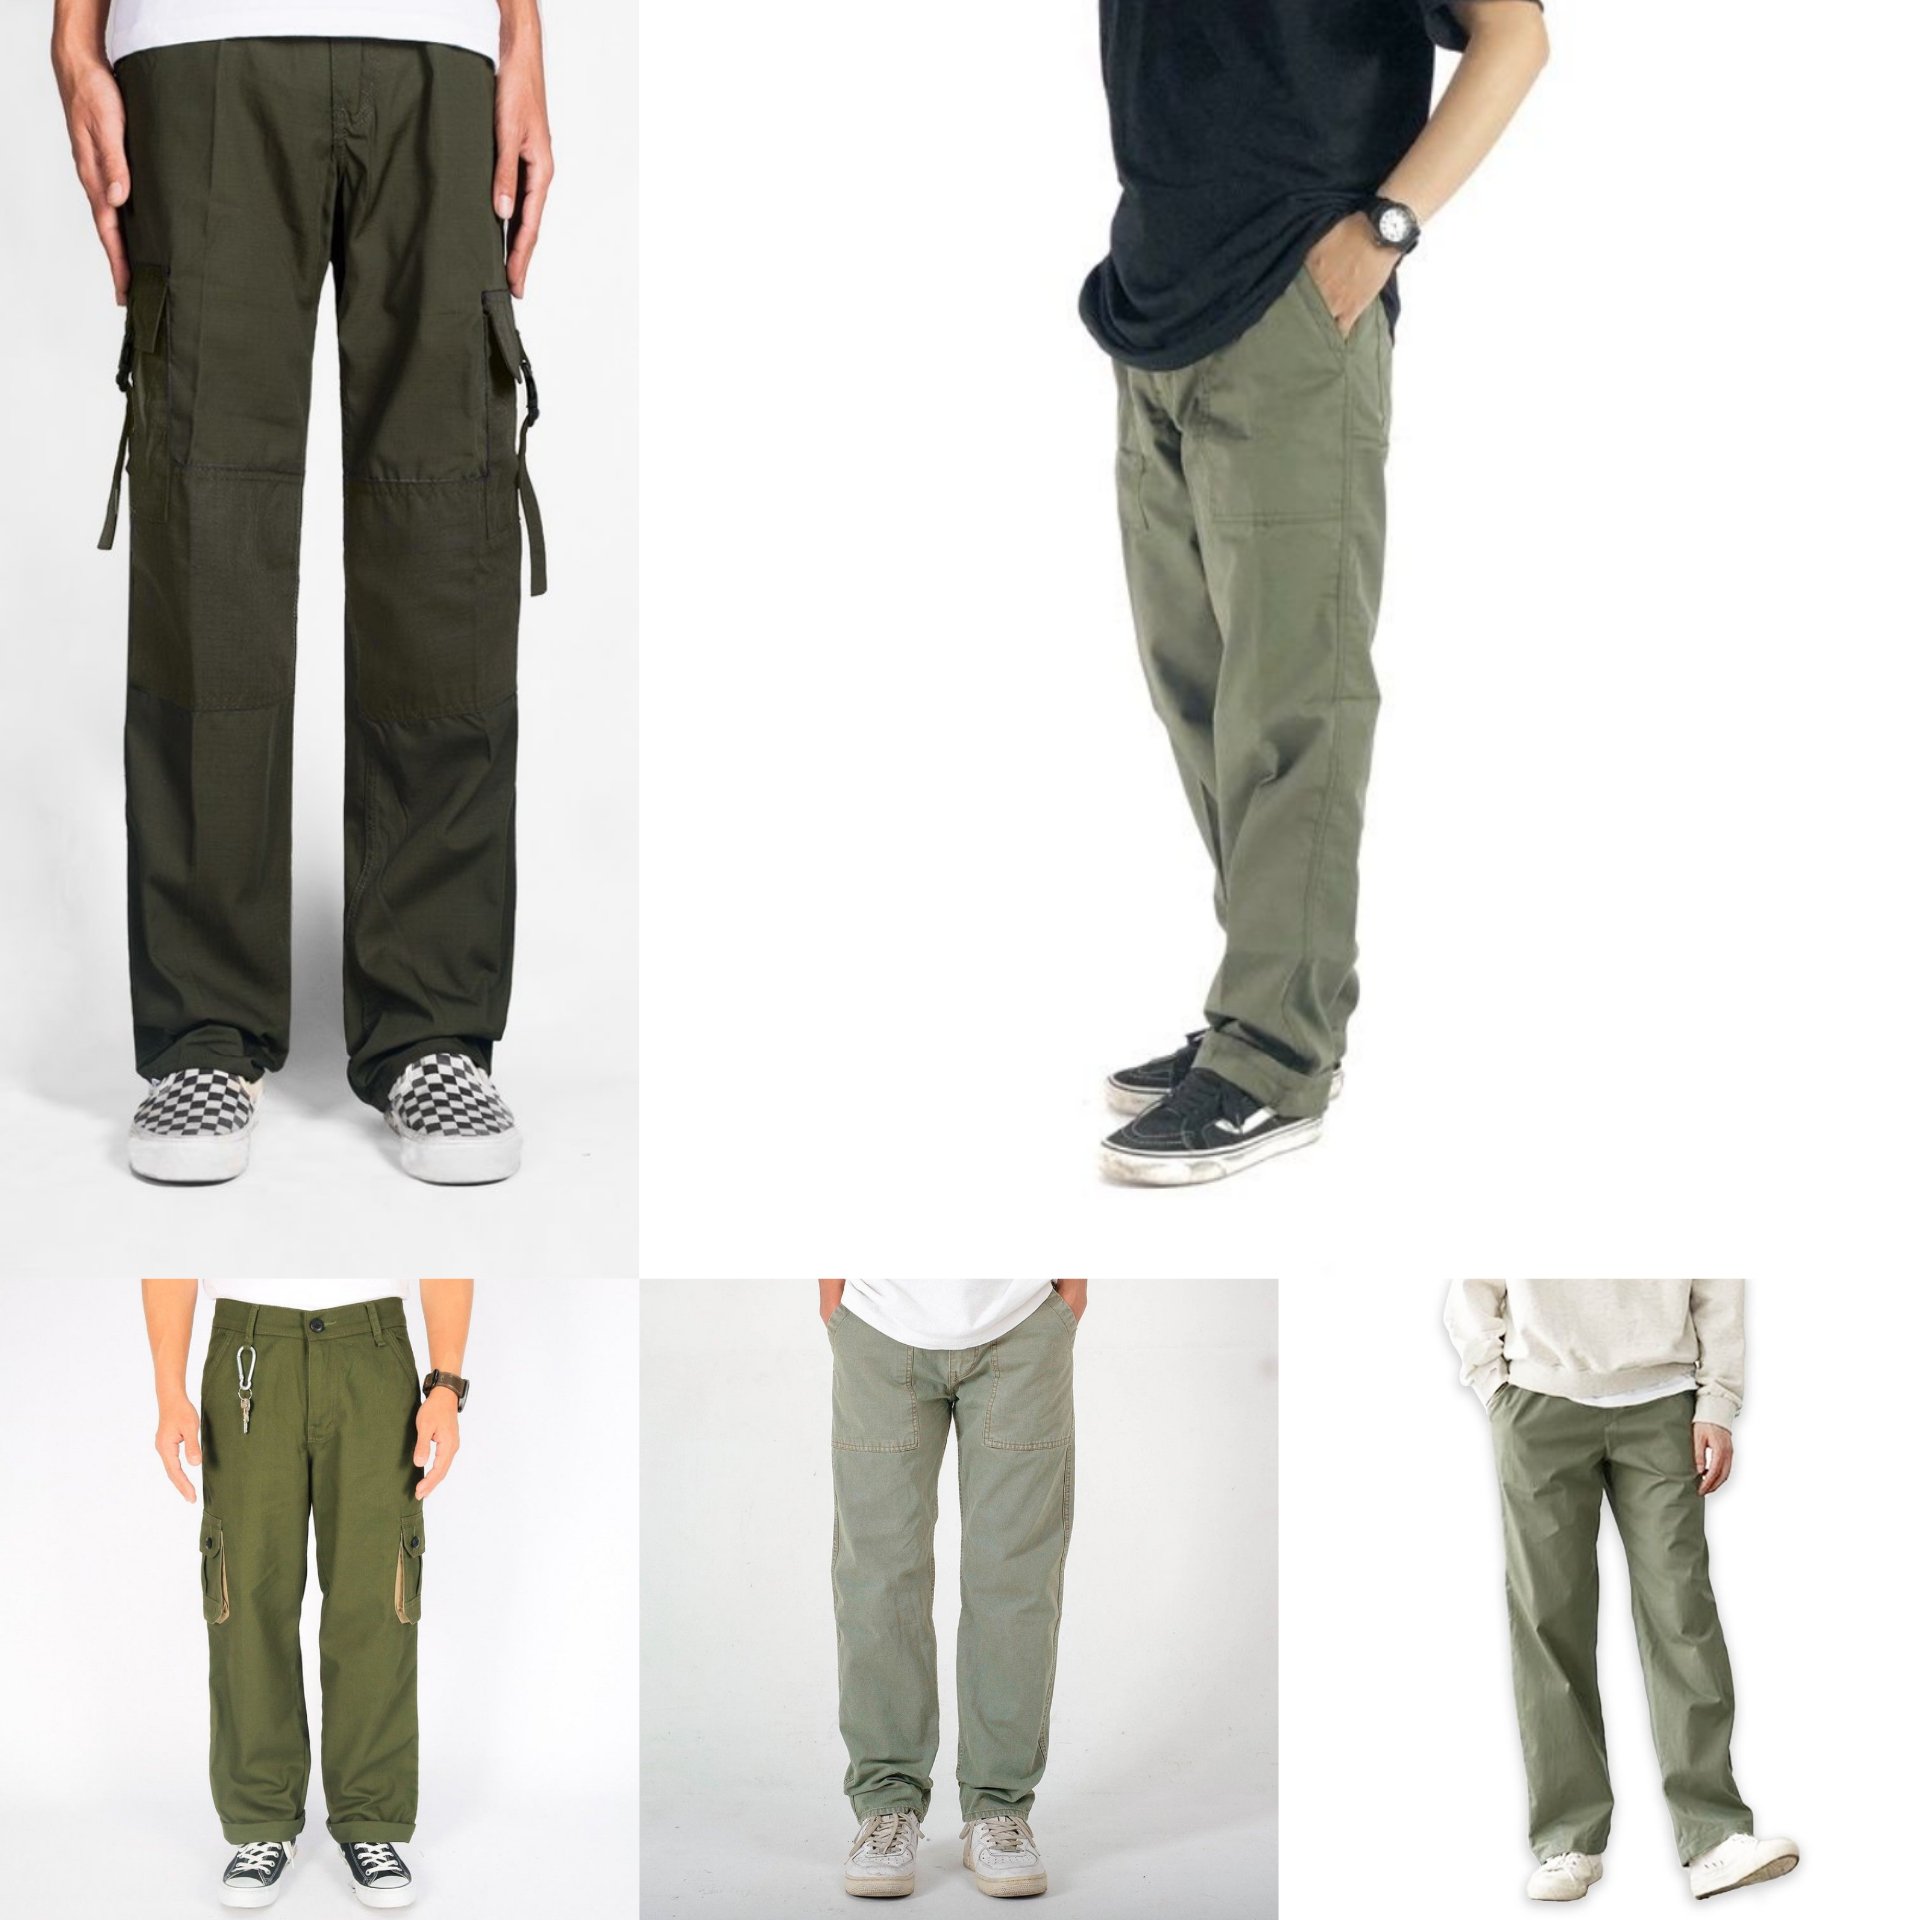 Cargo Pants V6 in Olive | Cargo pants men, Casual cargo pants, Mens pants  fashion